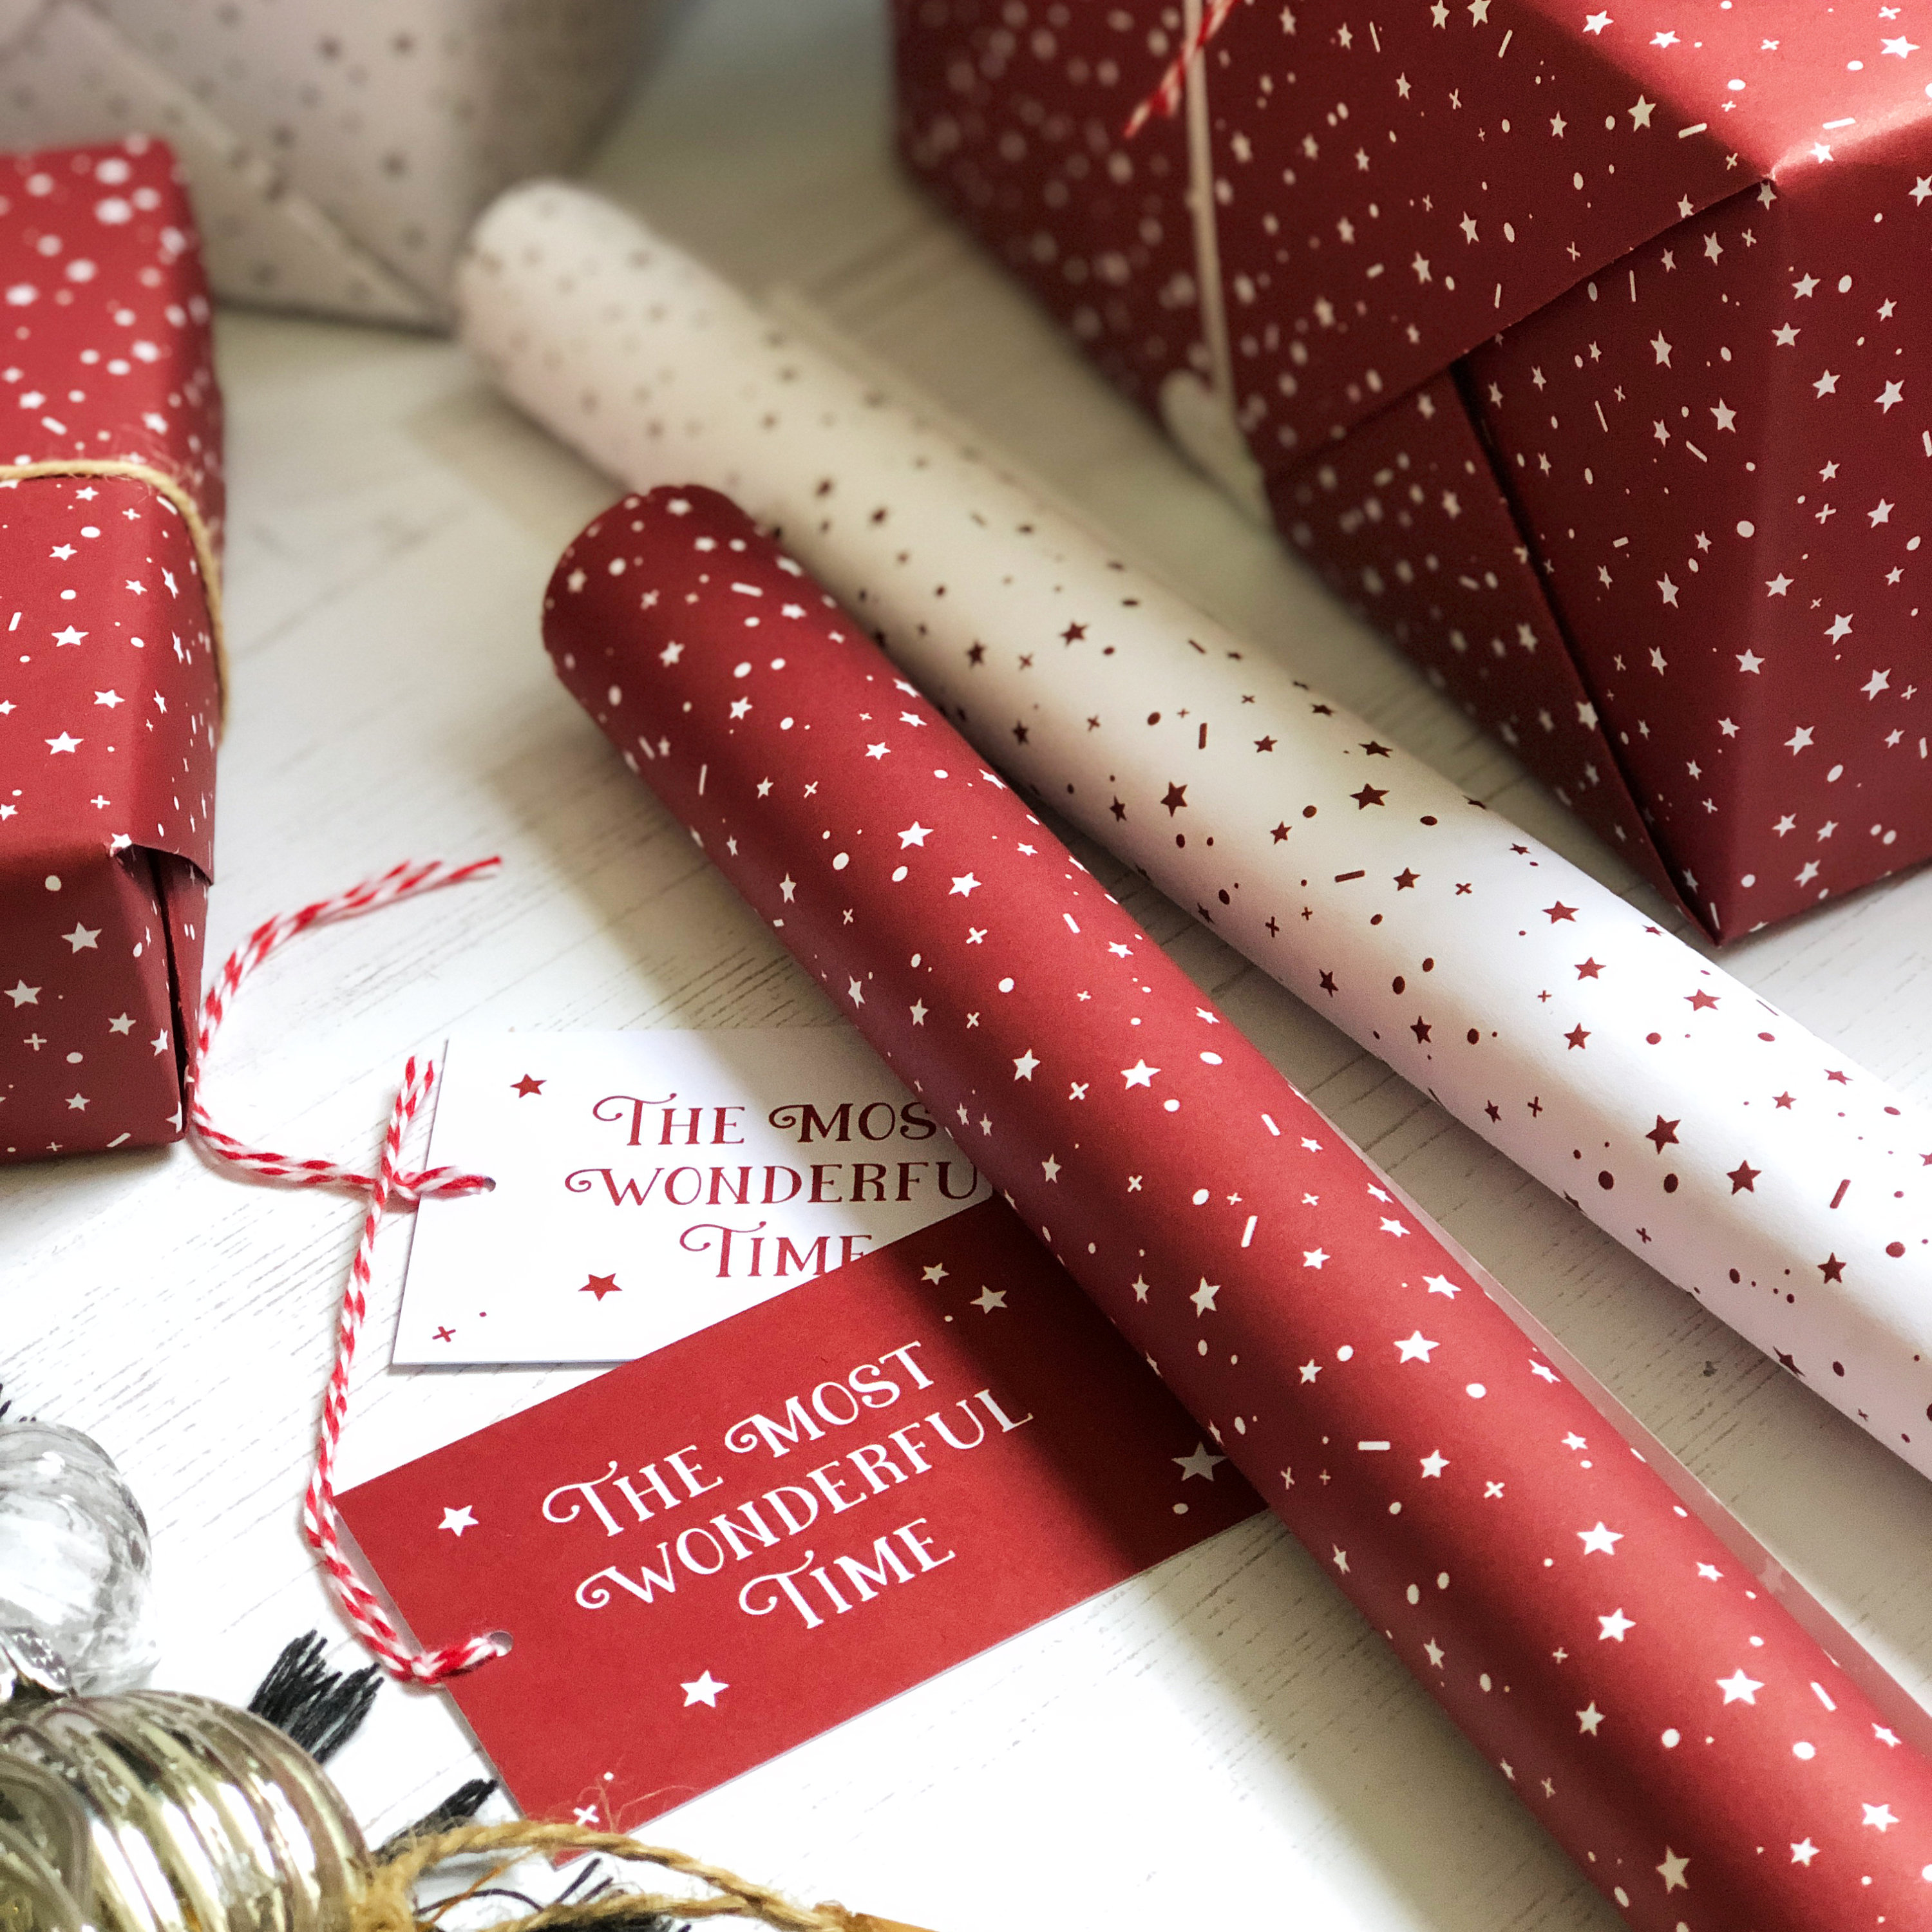 Cute Red and White Secret Santa Thick Wrapping Paper, Holiday Gift Wrap,  Gift Exchange Xmas Christmas Decor (12 foot x 30 inch roll)